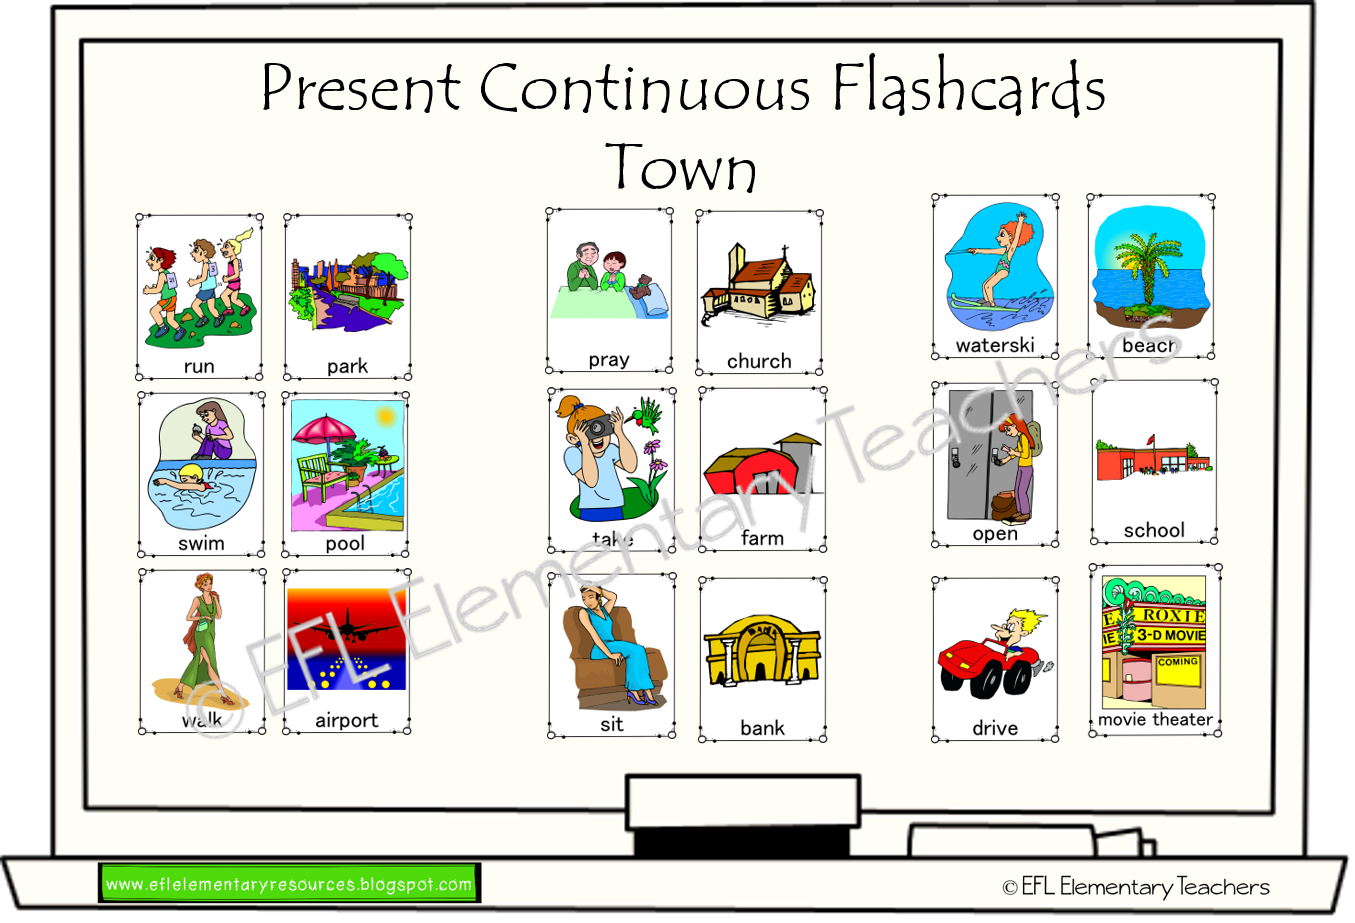 They play a game present continuous. Present Continuous Flashcards. Презент континиус Flashcards. Present Continuous картинки для описания. Present simple present Continuous Flashcards.